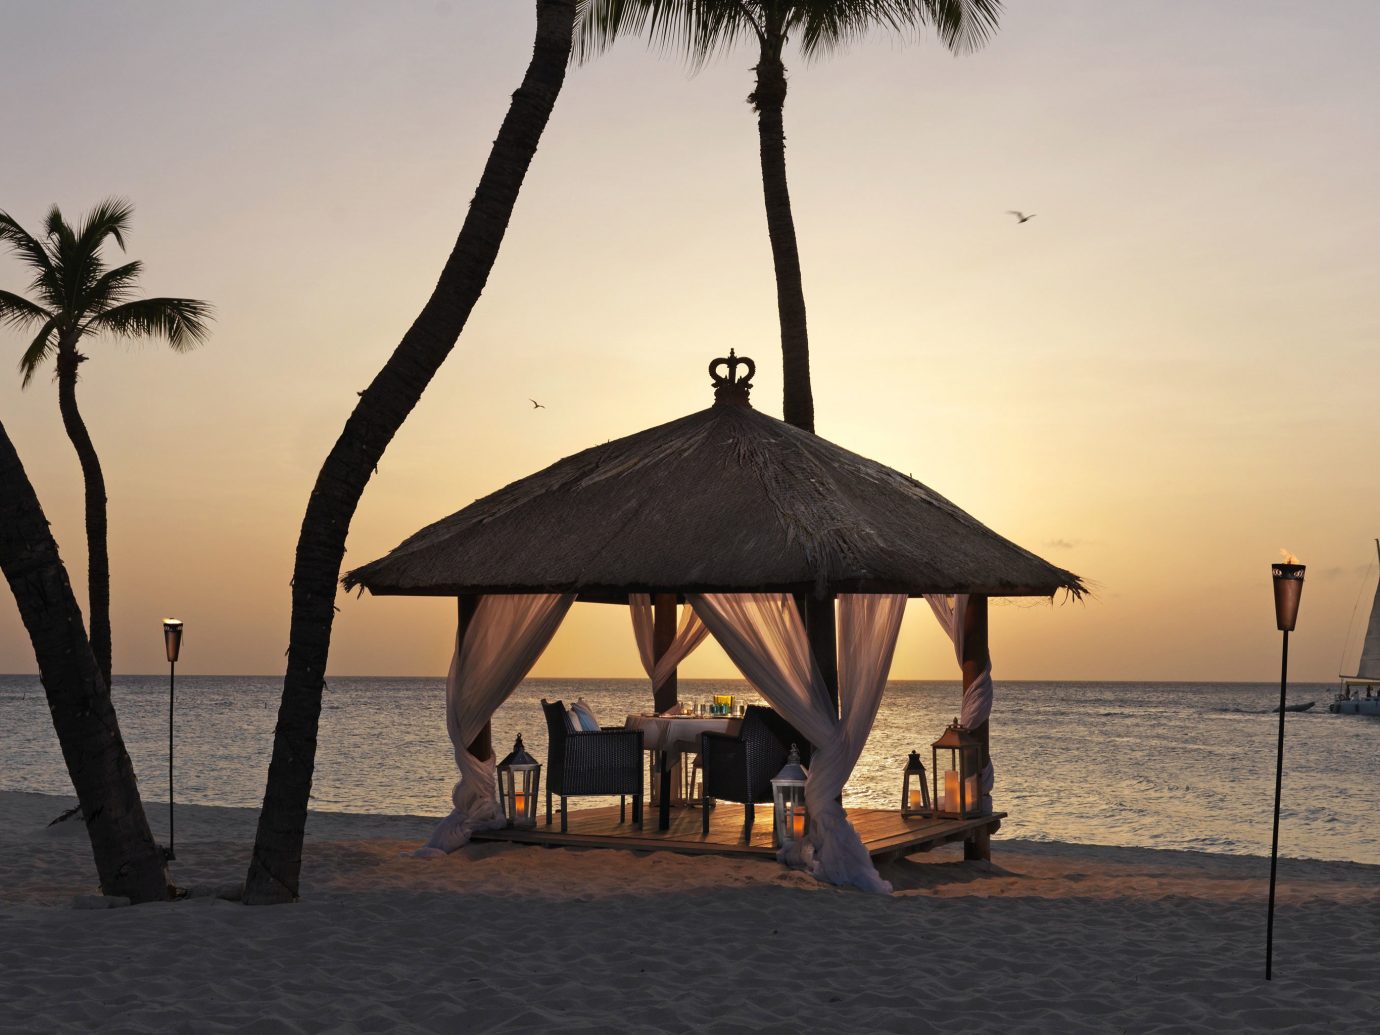 Beach Beachfront Hotels Living Lounge Luxury Ocean sky water outdoor chair Sea shore Sunset vacation morning evening tree Nature palm dusk sand travel sailing vessel shade sandy day